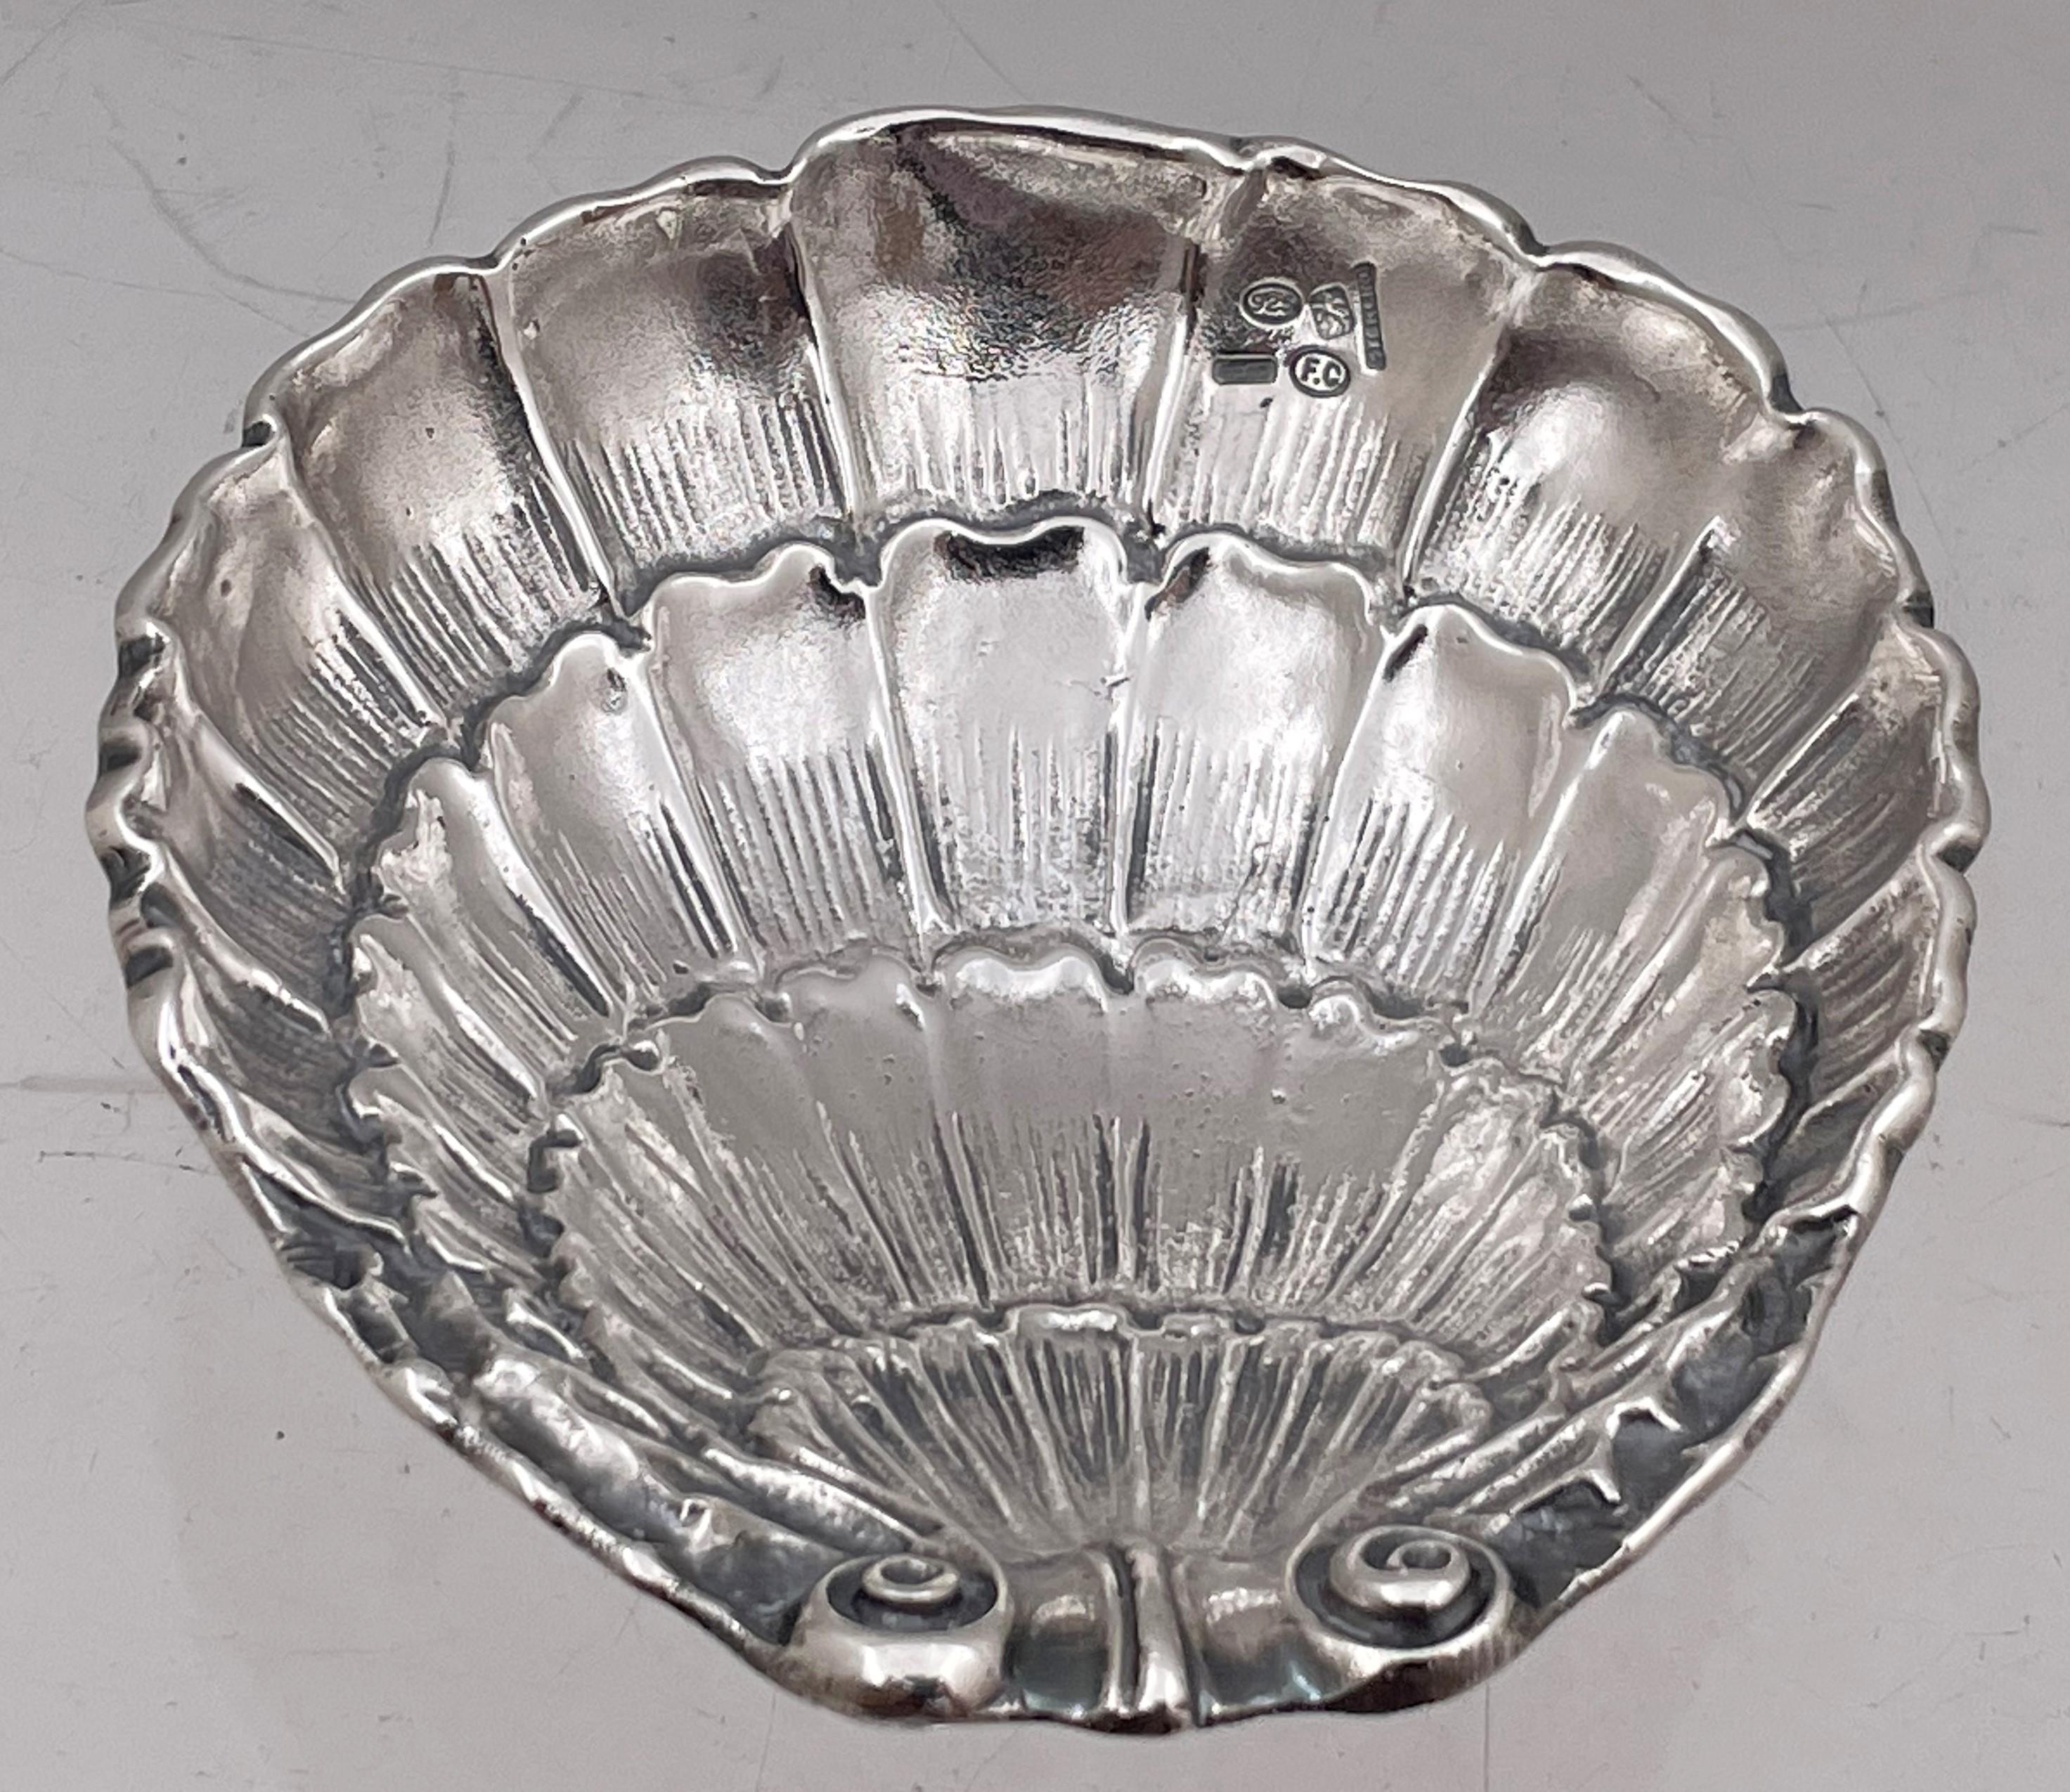 Cacchione Prestigious Italian Sterling Silver Shell-Shaped Nut/ Trinket Dish In Good Condition For Sale In New York, NY